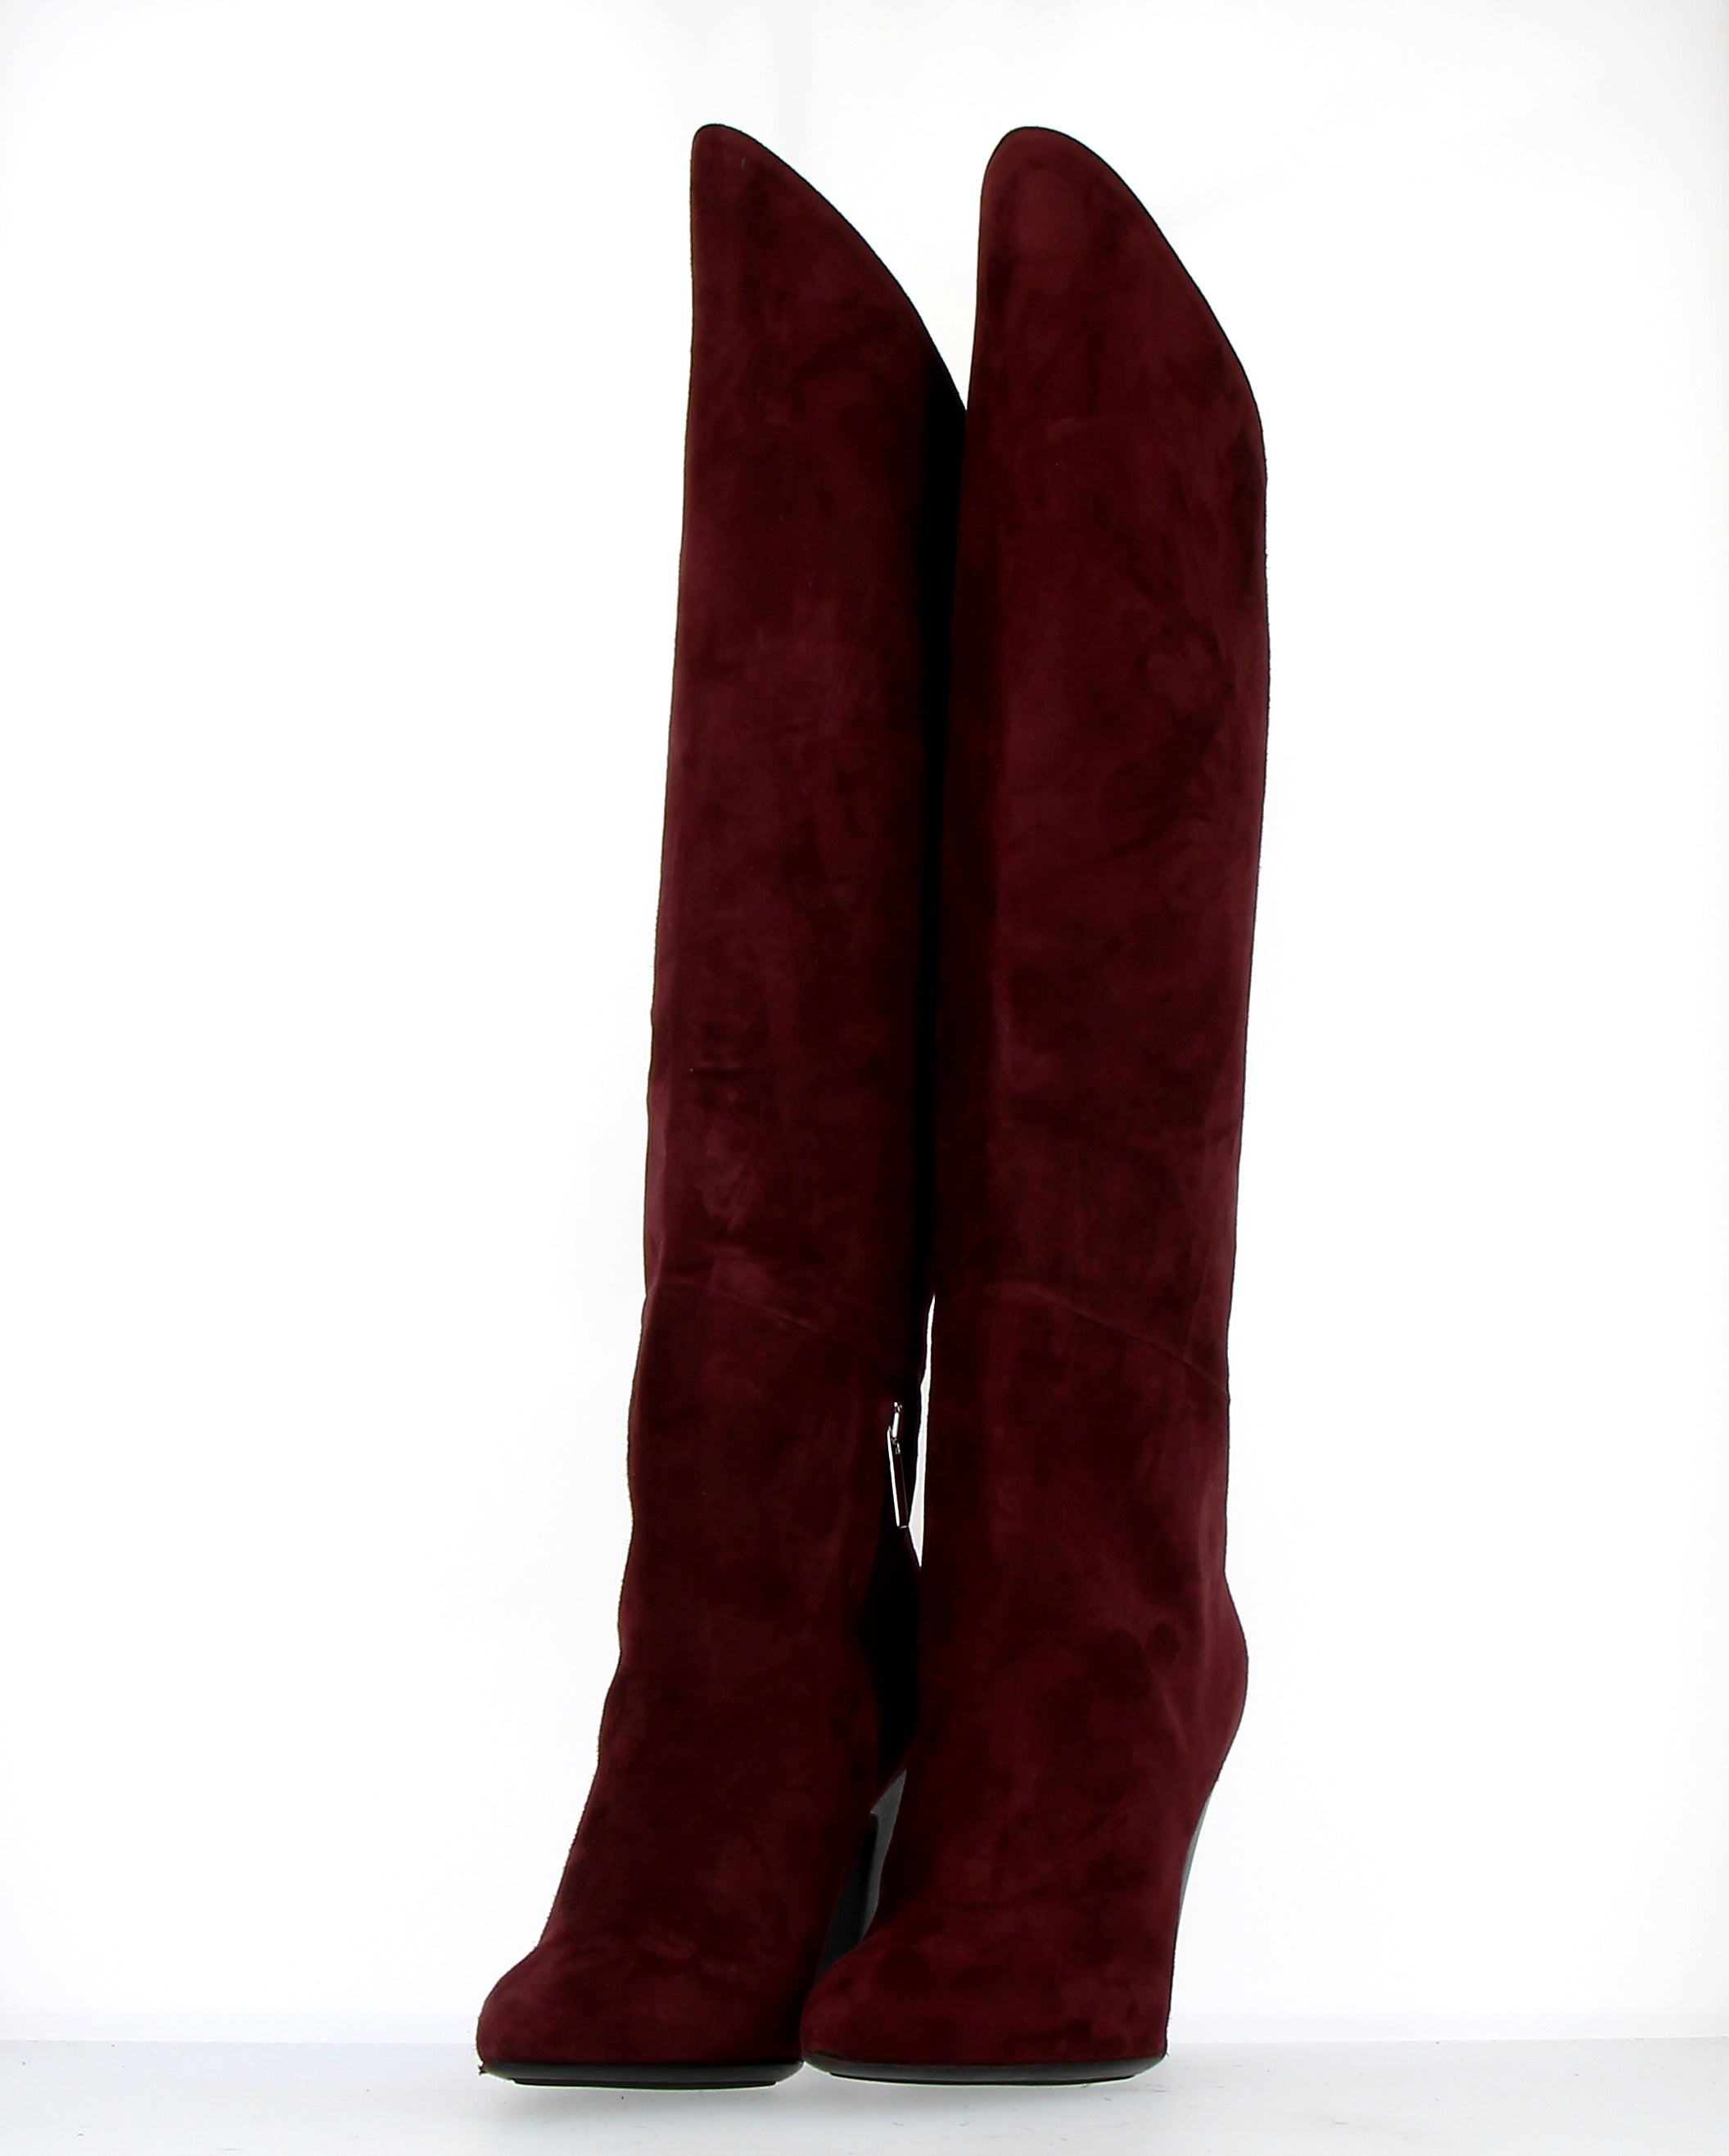 Short cuissard boot in burgundy suede with high heel